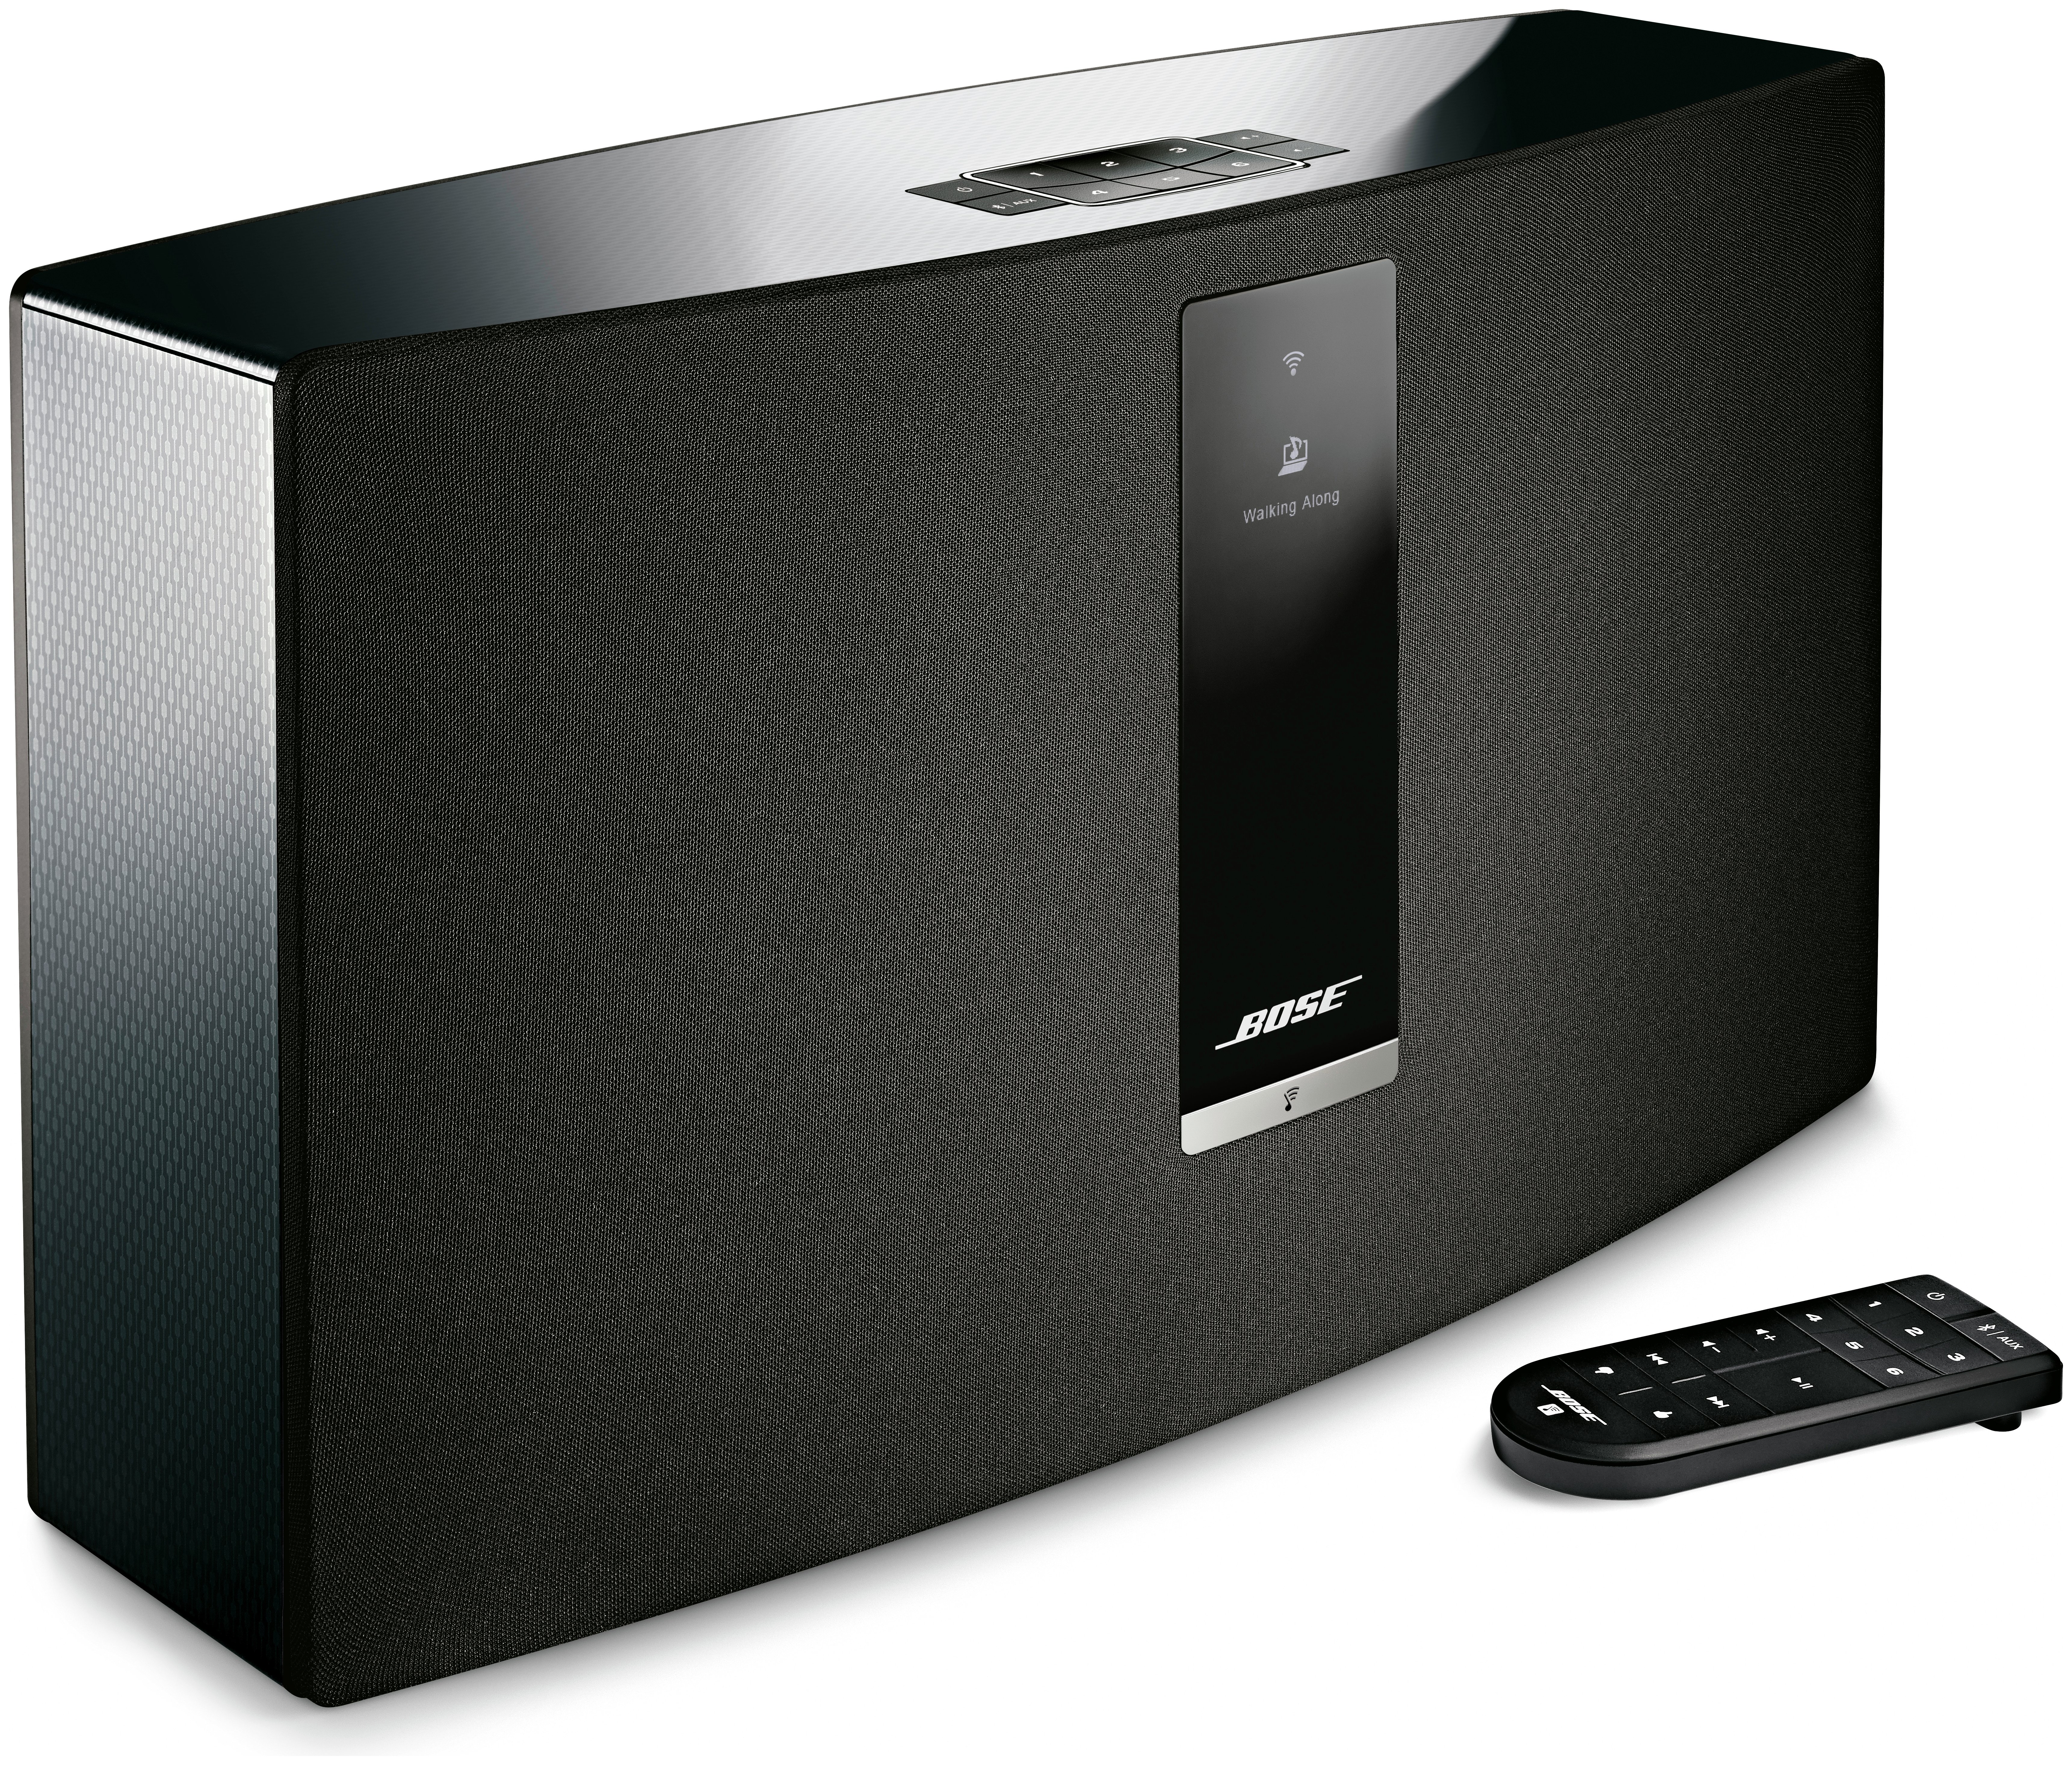 Bose SoundTouch 30 Series III Wireless Music System - Black